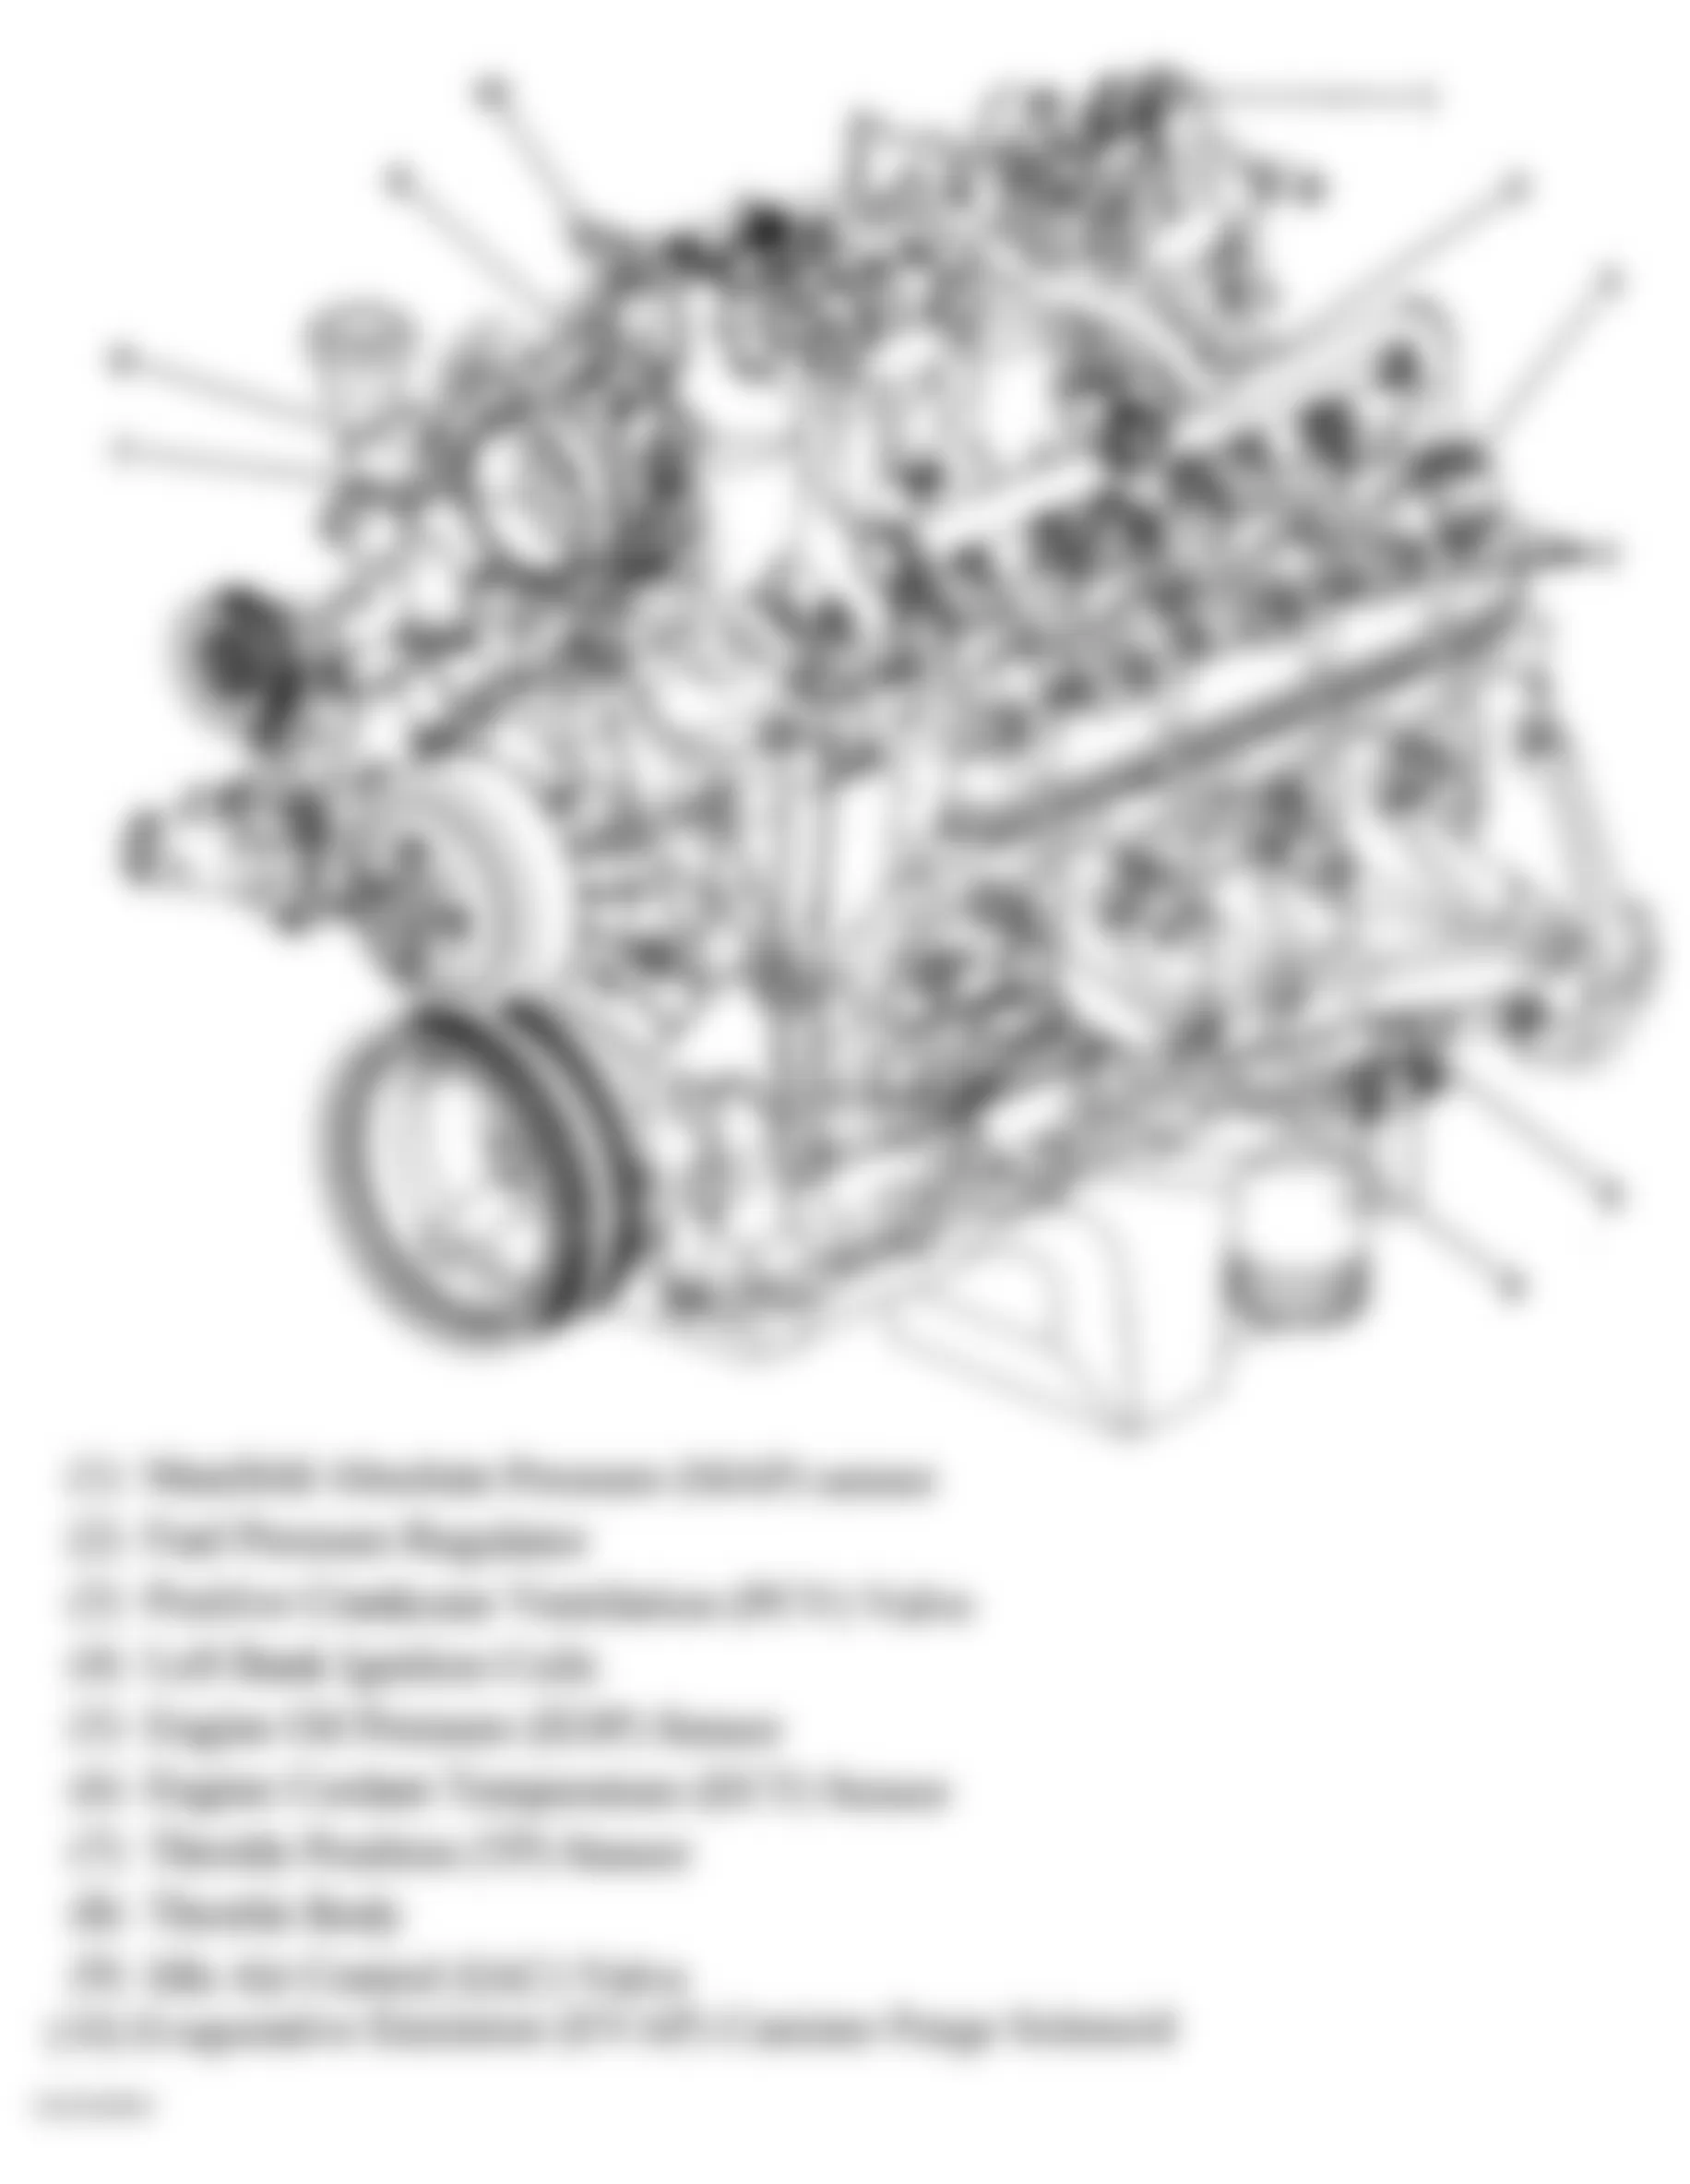 GMC Sierra 1500 2006 - Component Locations -  Left Front Of Engine (4.8L, 5.3L & 6.0L)